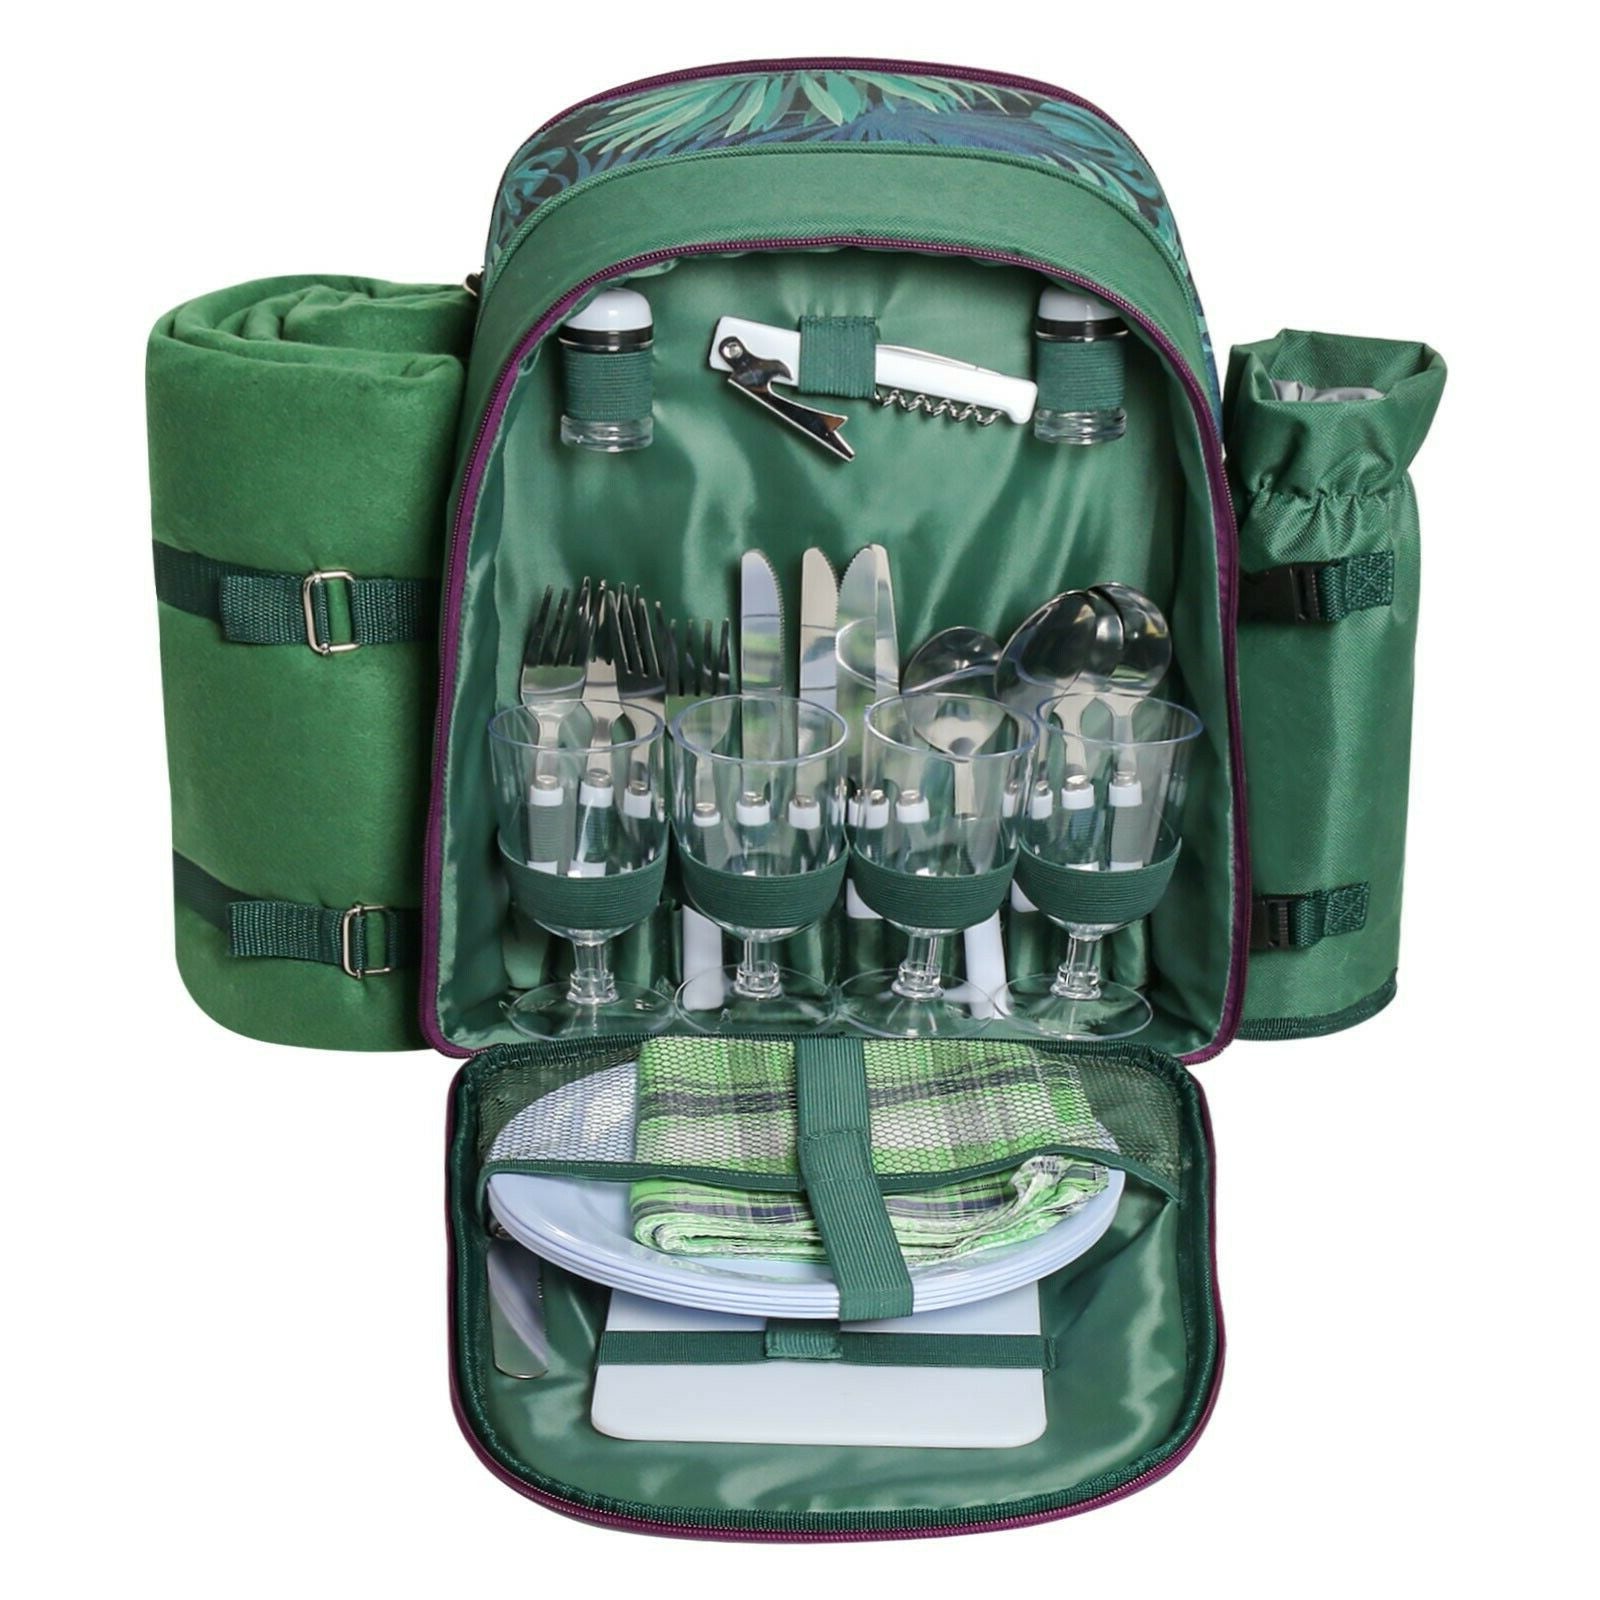 Picnic Backpack Set With Cutlery Kit Cooler Compartment Blanket For 4 Persons Picnic Bag with Tableware for Outdoor Camping BBQ